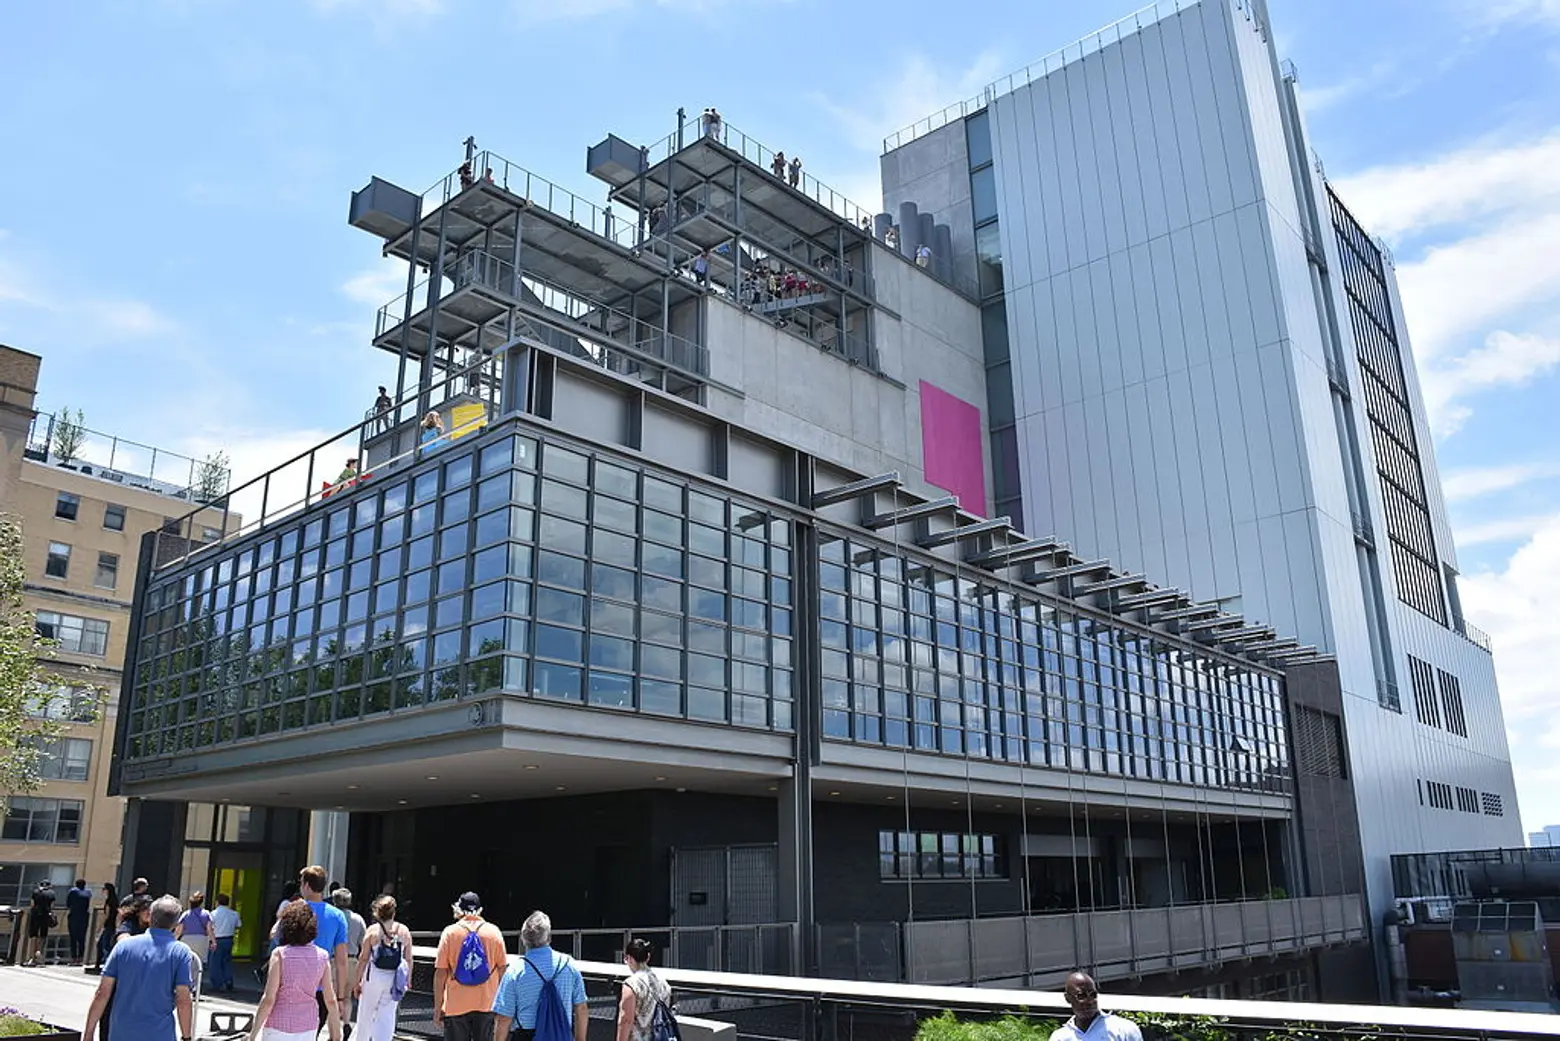 The Whitney Museum announces free admission on Friday nights, second Sundays